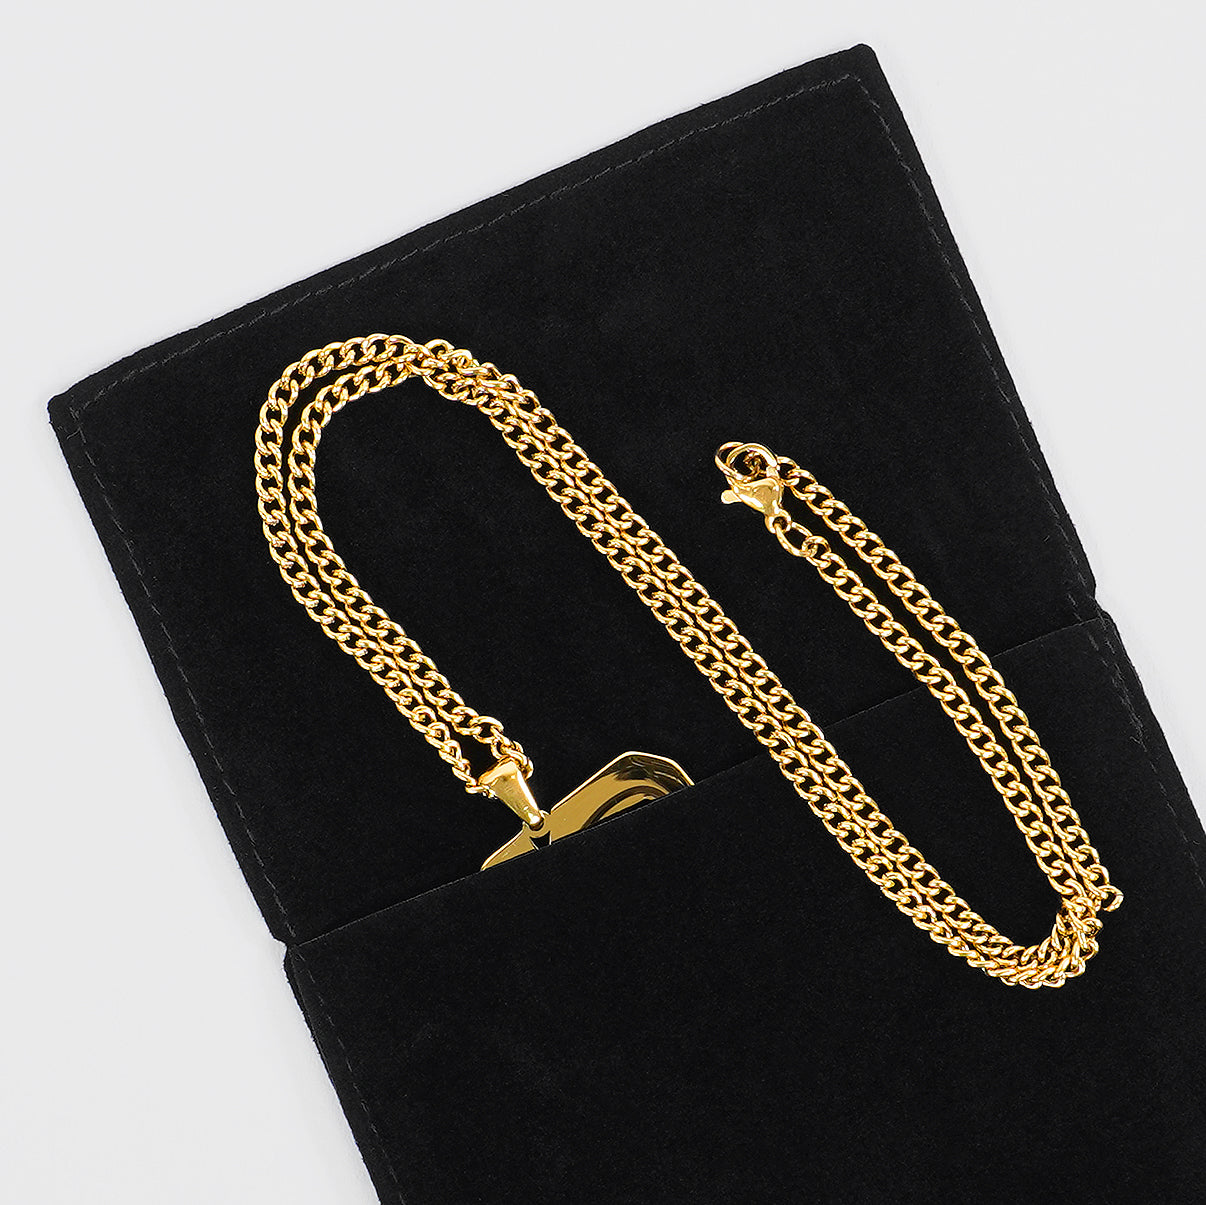 95 Number Pendant with Chain Necklace - Gold Plated Stainless Steel